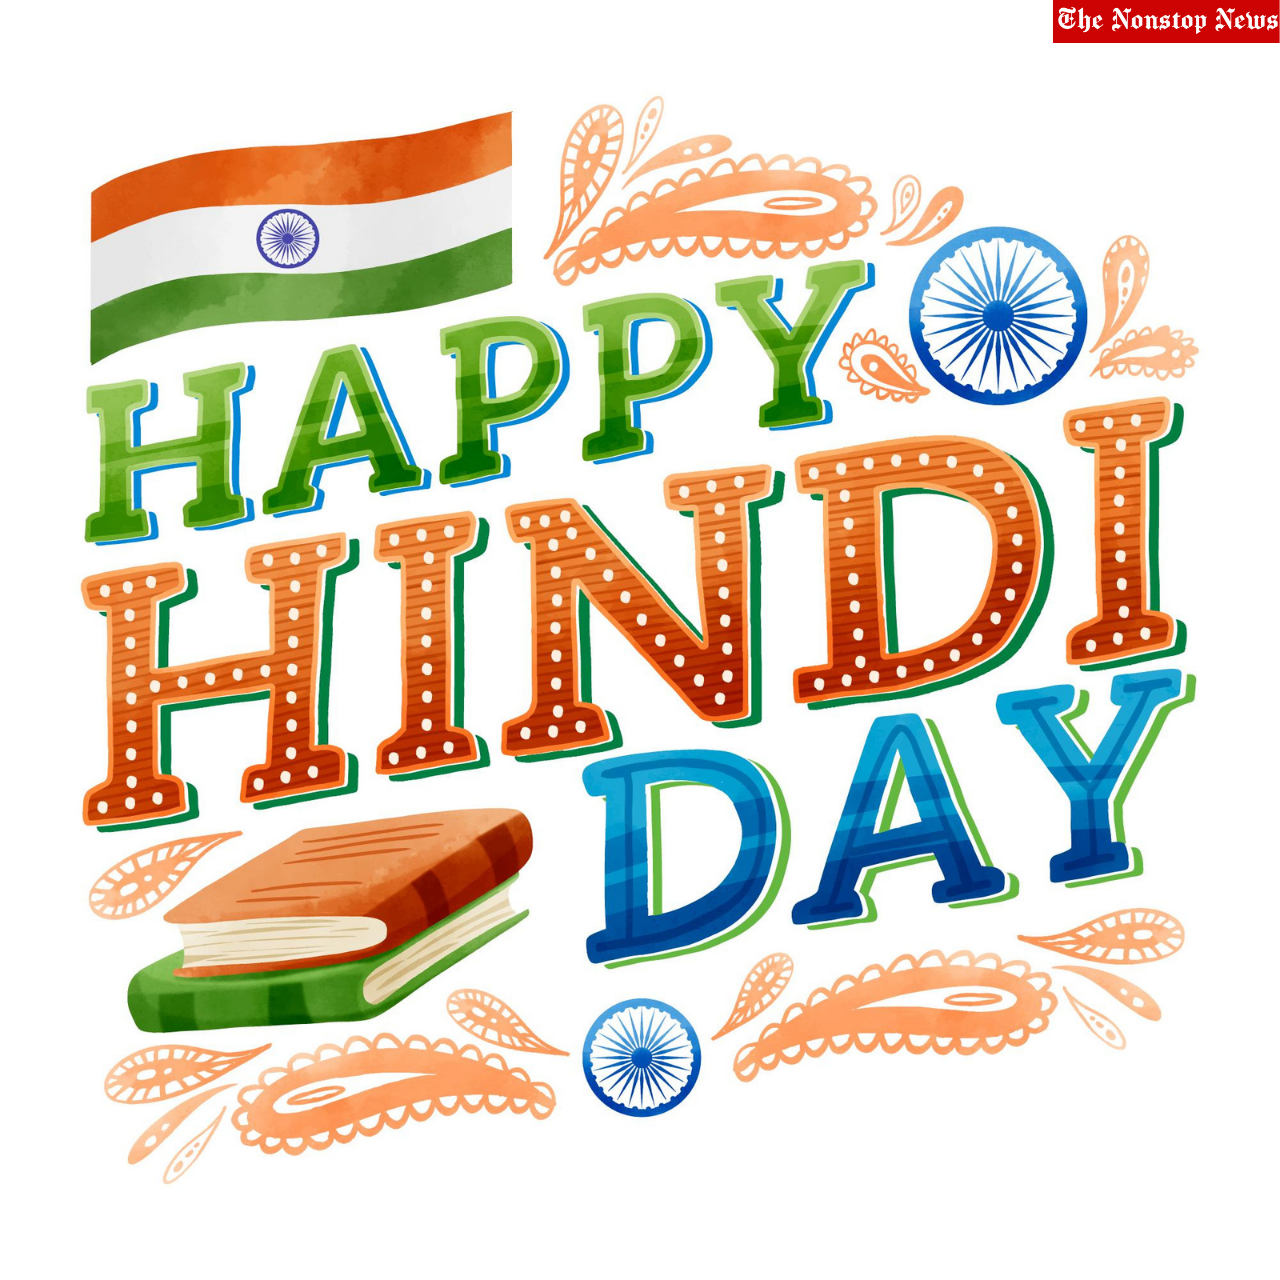 Hindi Day 2022 Instagram Captions, Facebook Quotes, WhatsApp Messages, Posters, Drawings, Gif, Memes to share